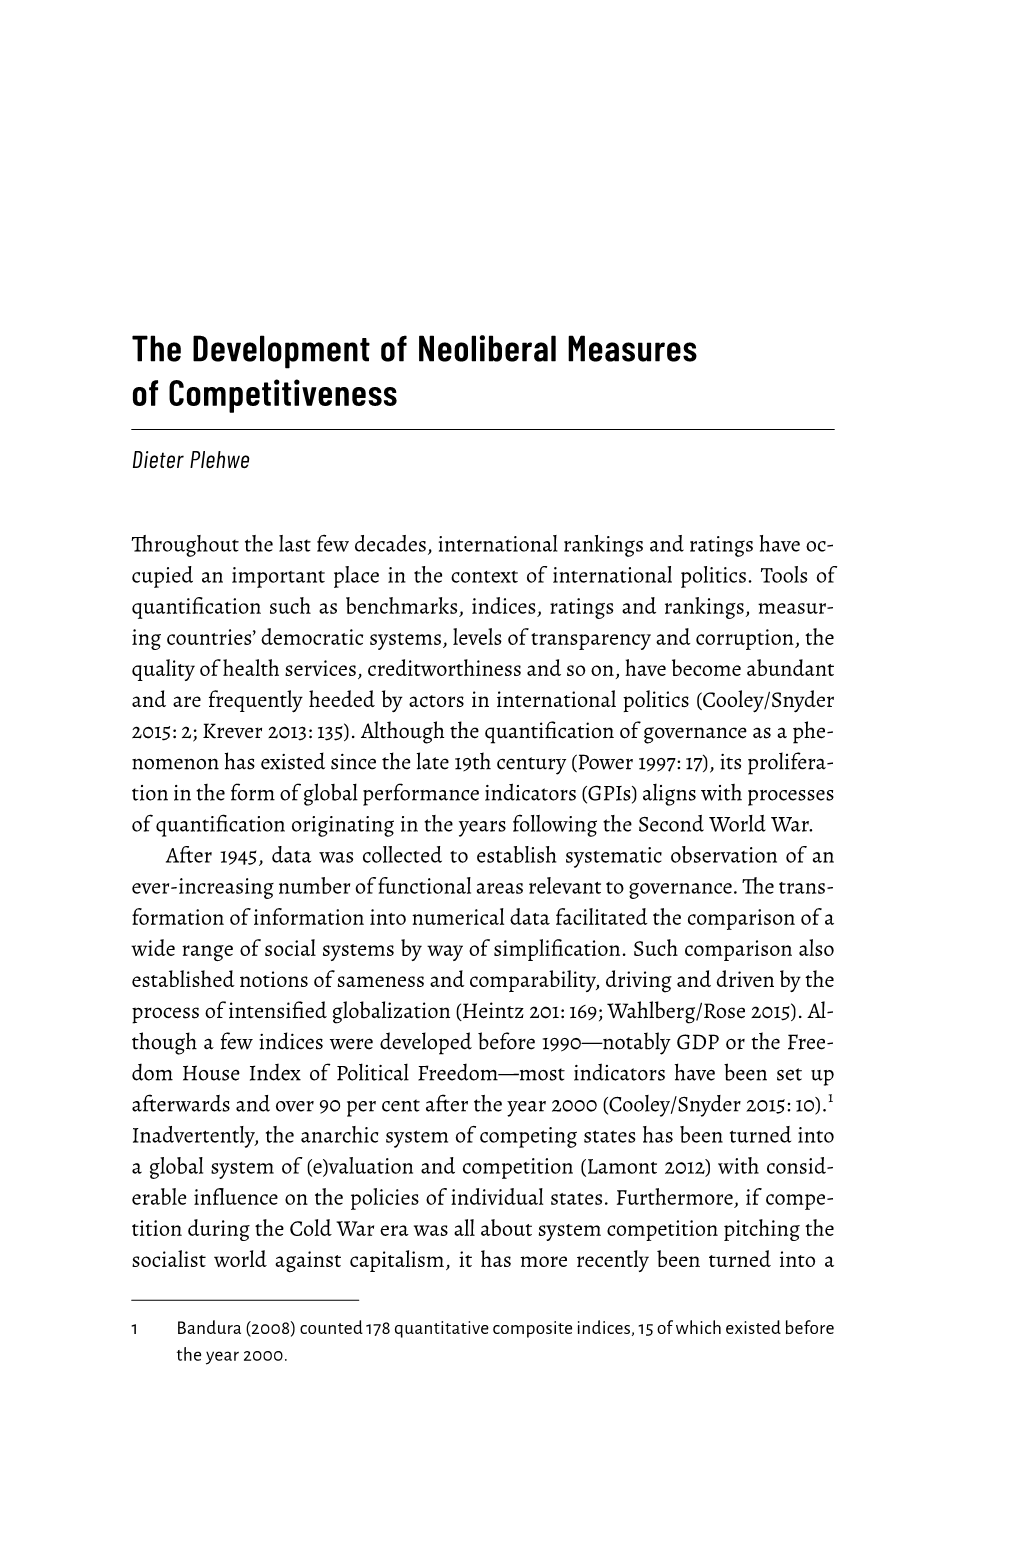 The Development of Neoliberal Measures of Competitiveness